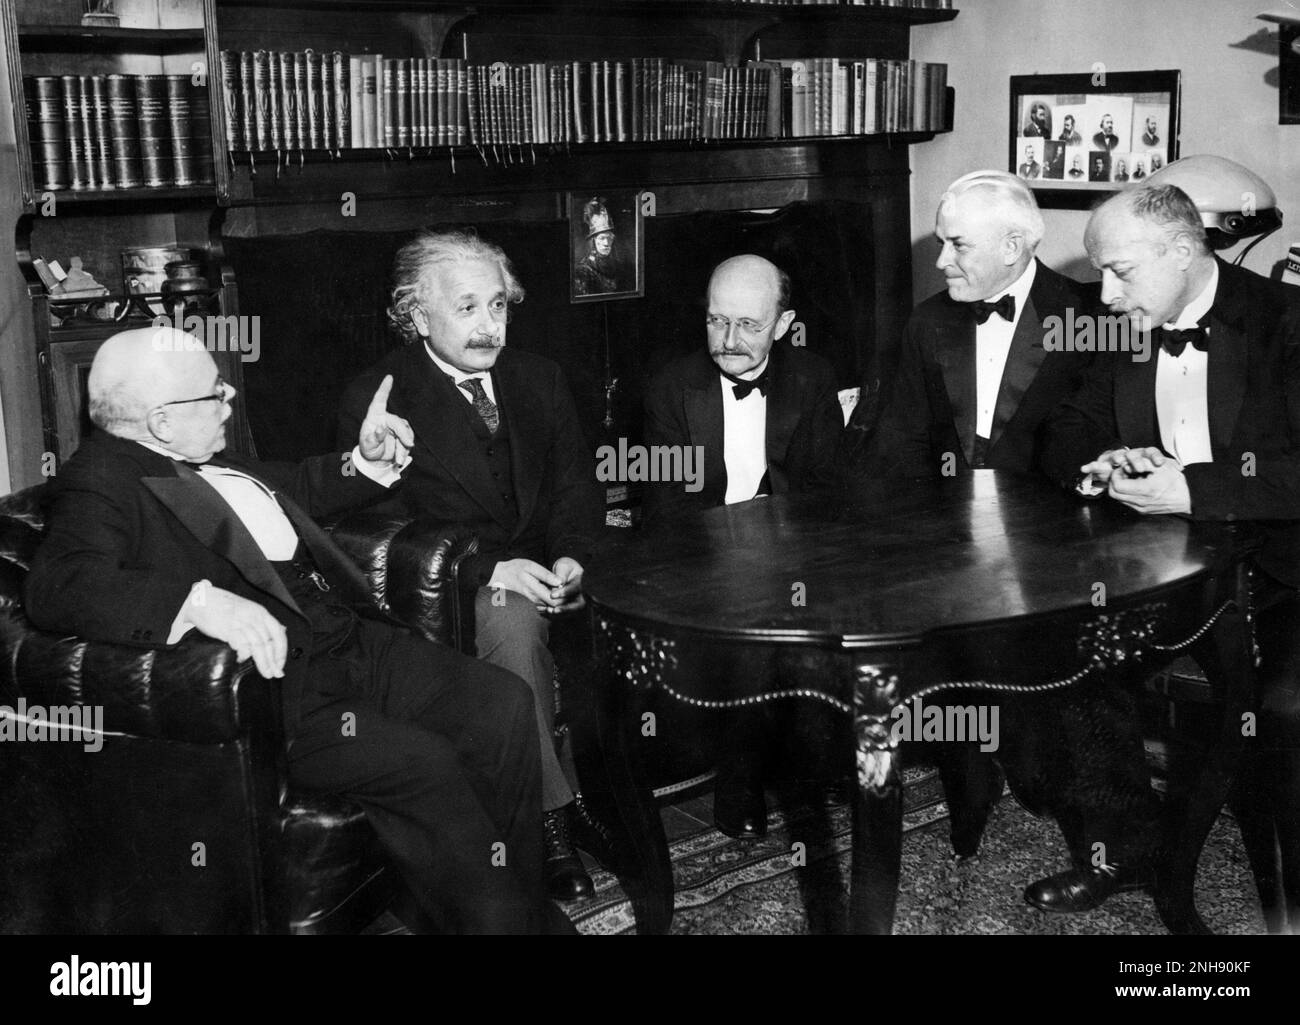 German and American physicists and chemists (left to right): Walther Nernst, Albert Einstein, Max Planck, Robert Andrews Millikan, and Max von Laue, at a dinner given by Max von Laue on 12 November 1931 in Berlin. Stock Photo